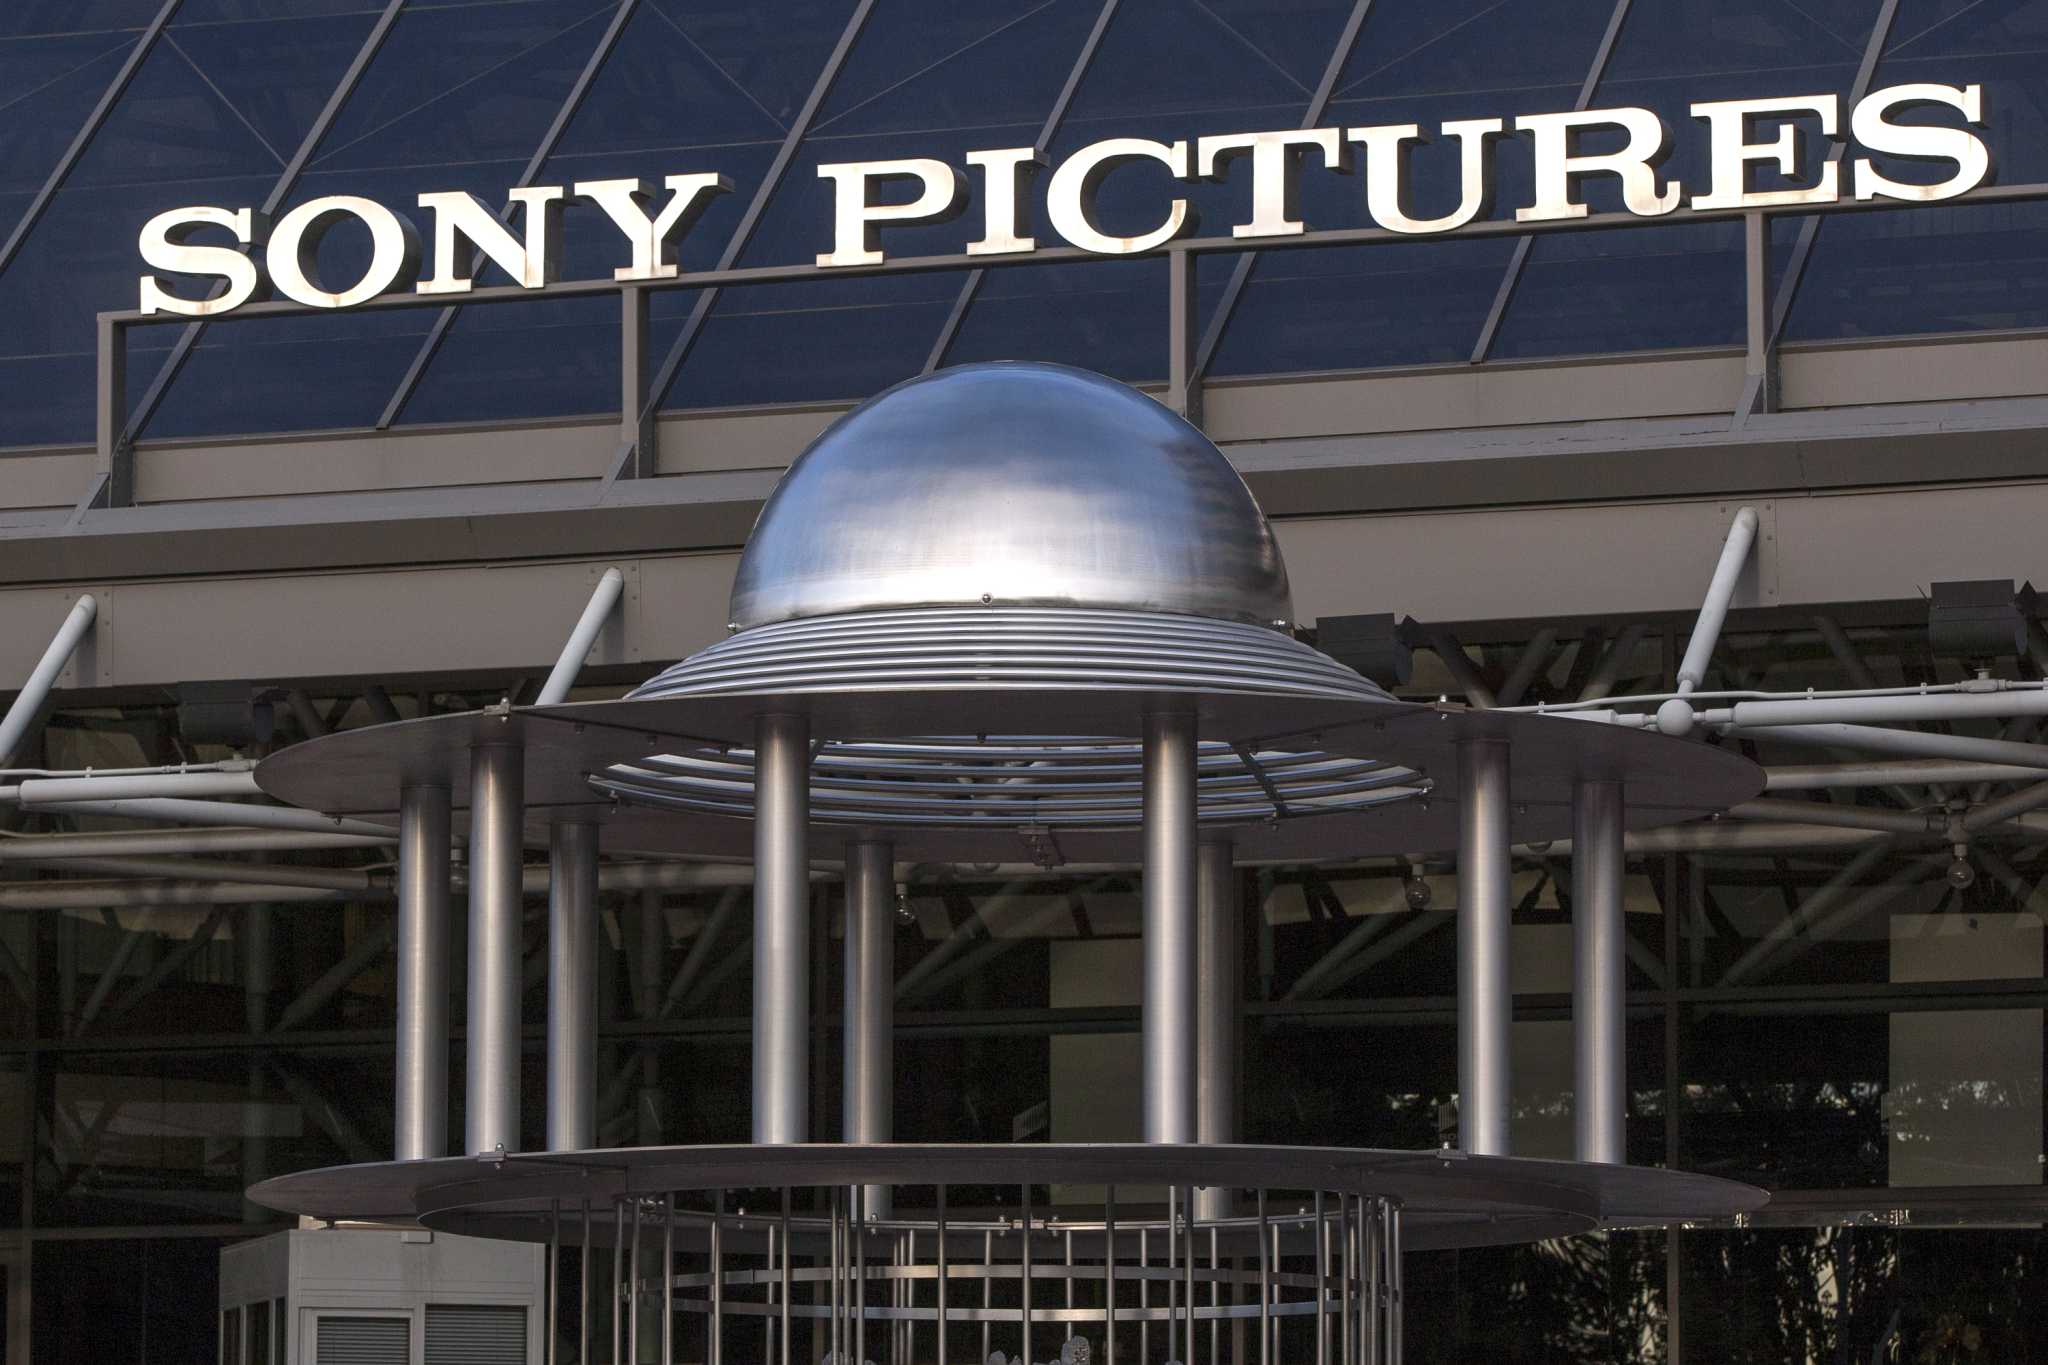 Japan's Sony reports surge in profit on strong sales of movies, games and music